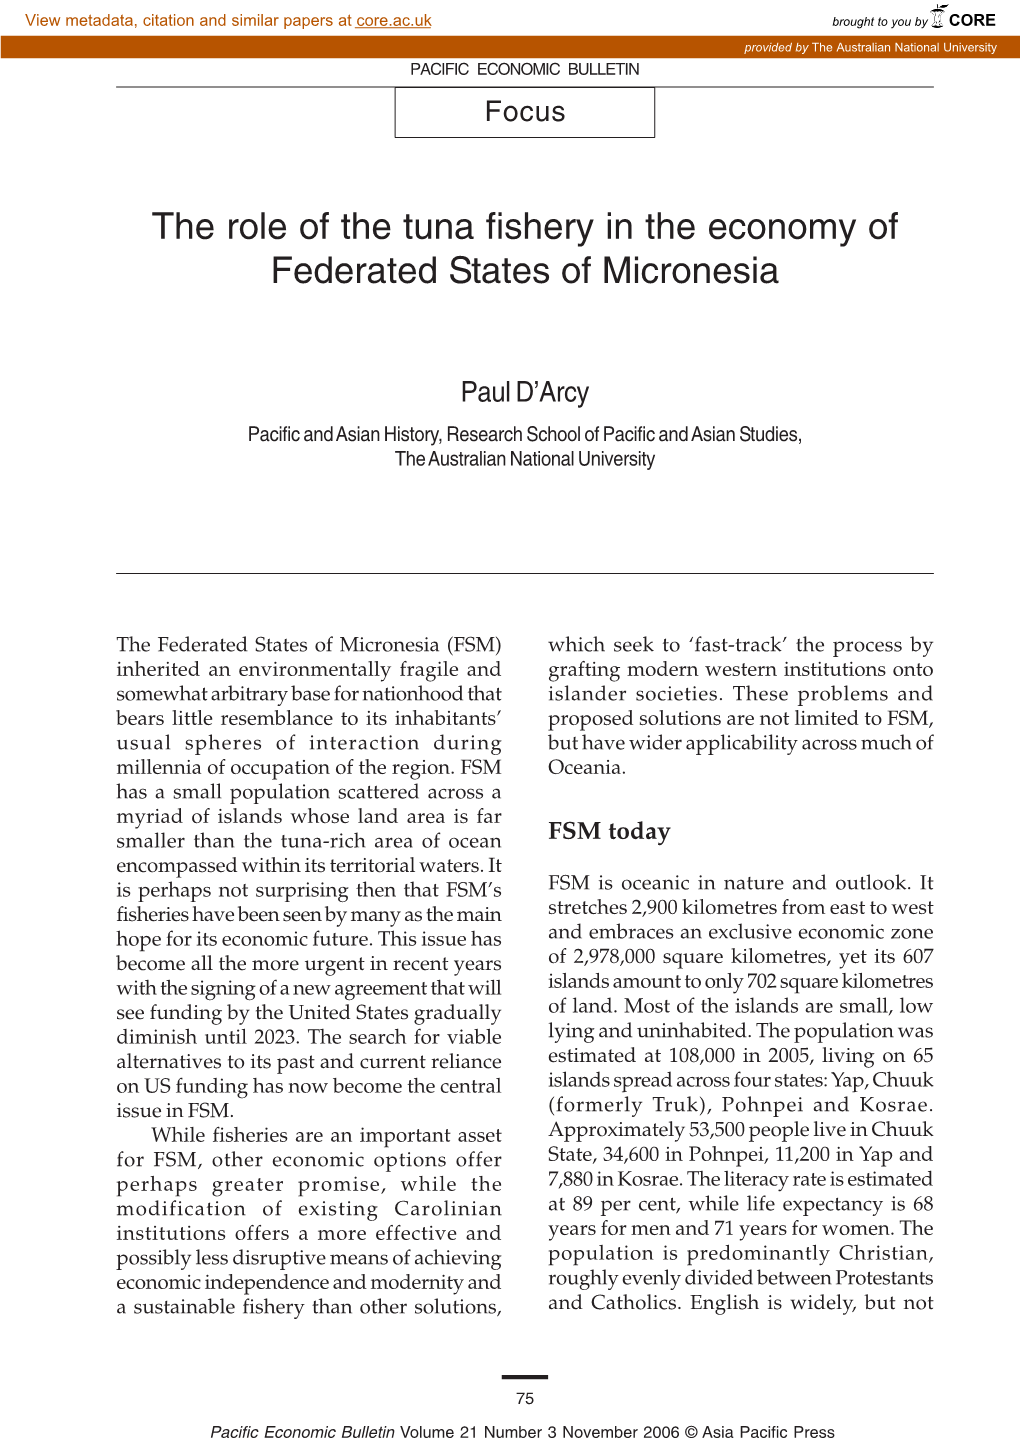 The Role of the Tuna Fishery in the Economy of Federated States of Micronesia